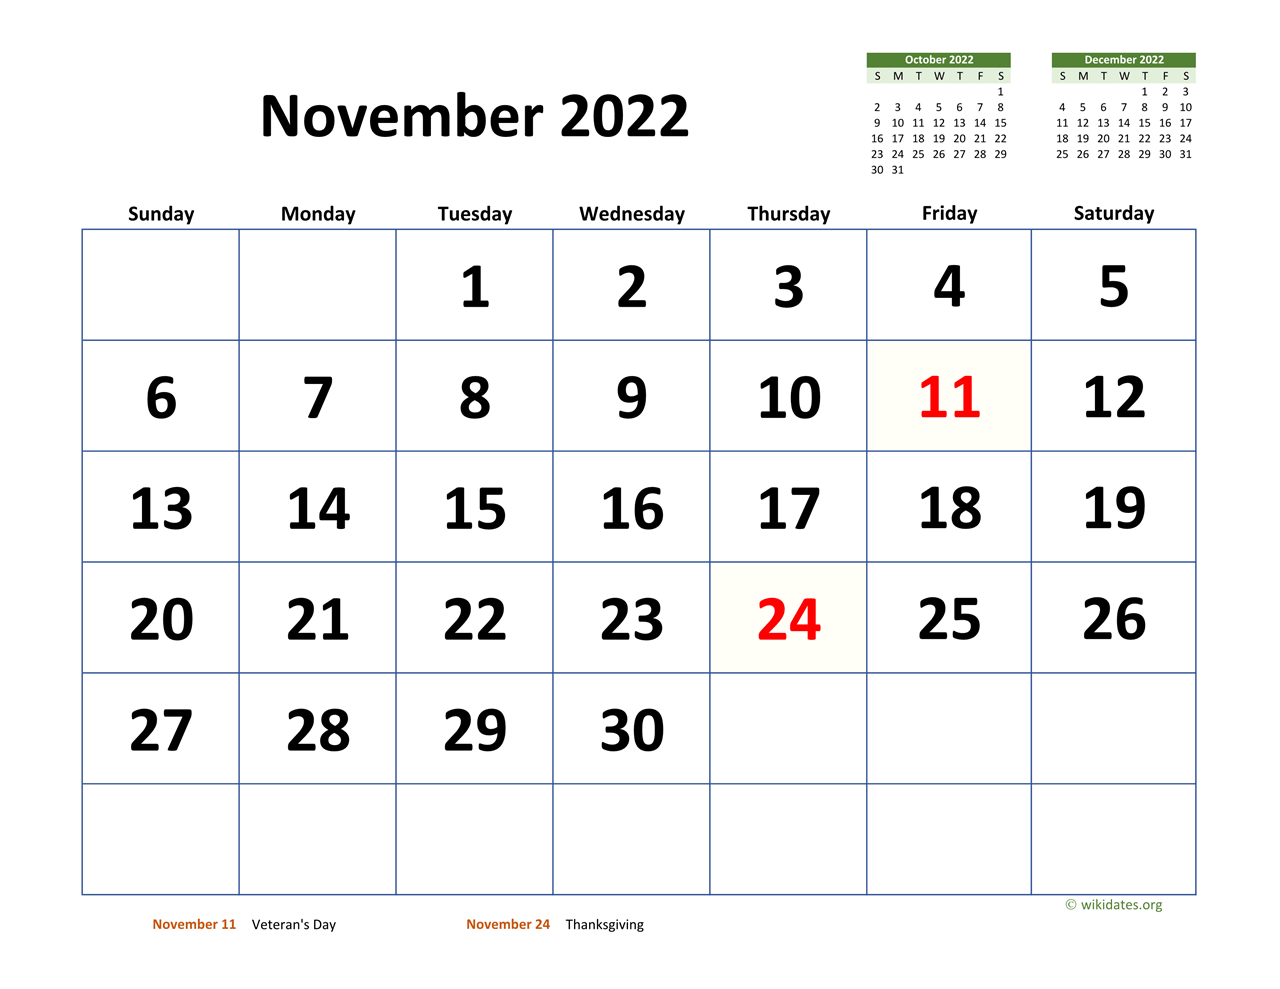 November 2022 Calendar with Extra-large Dates | WikiDates.org